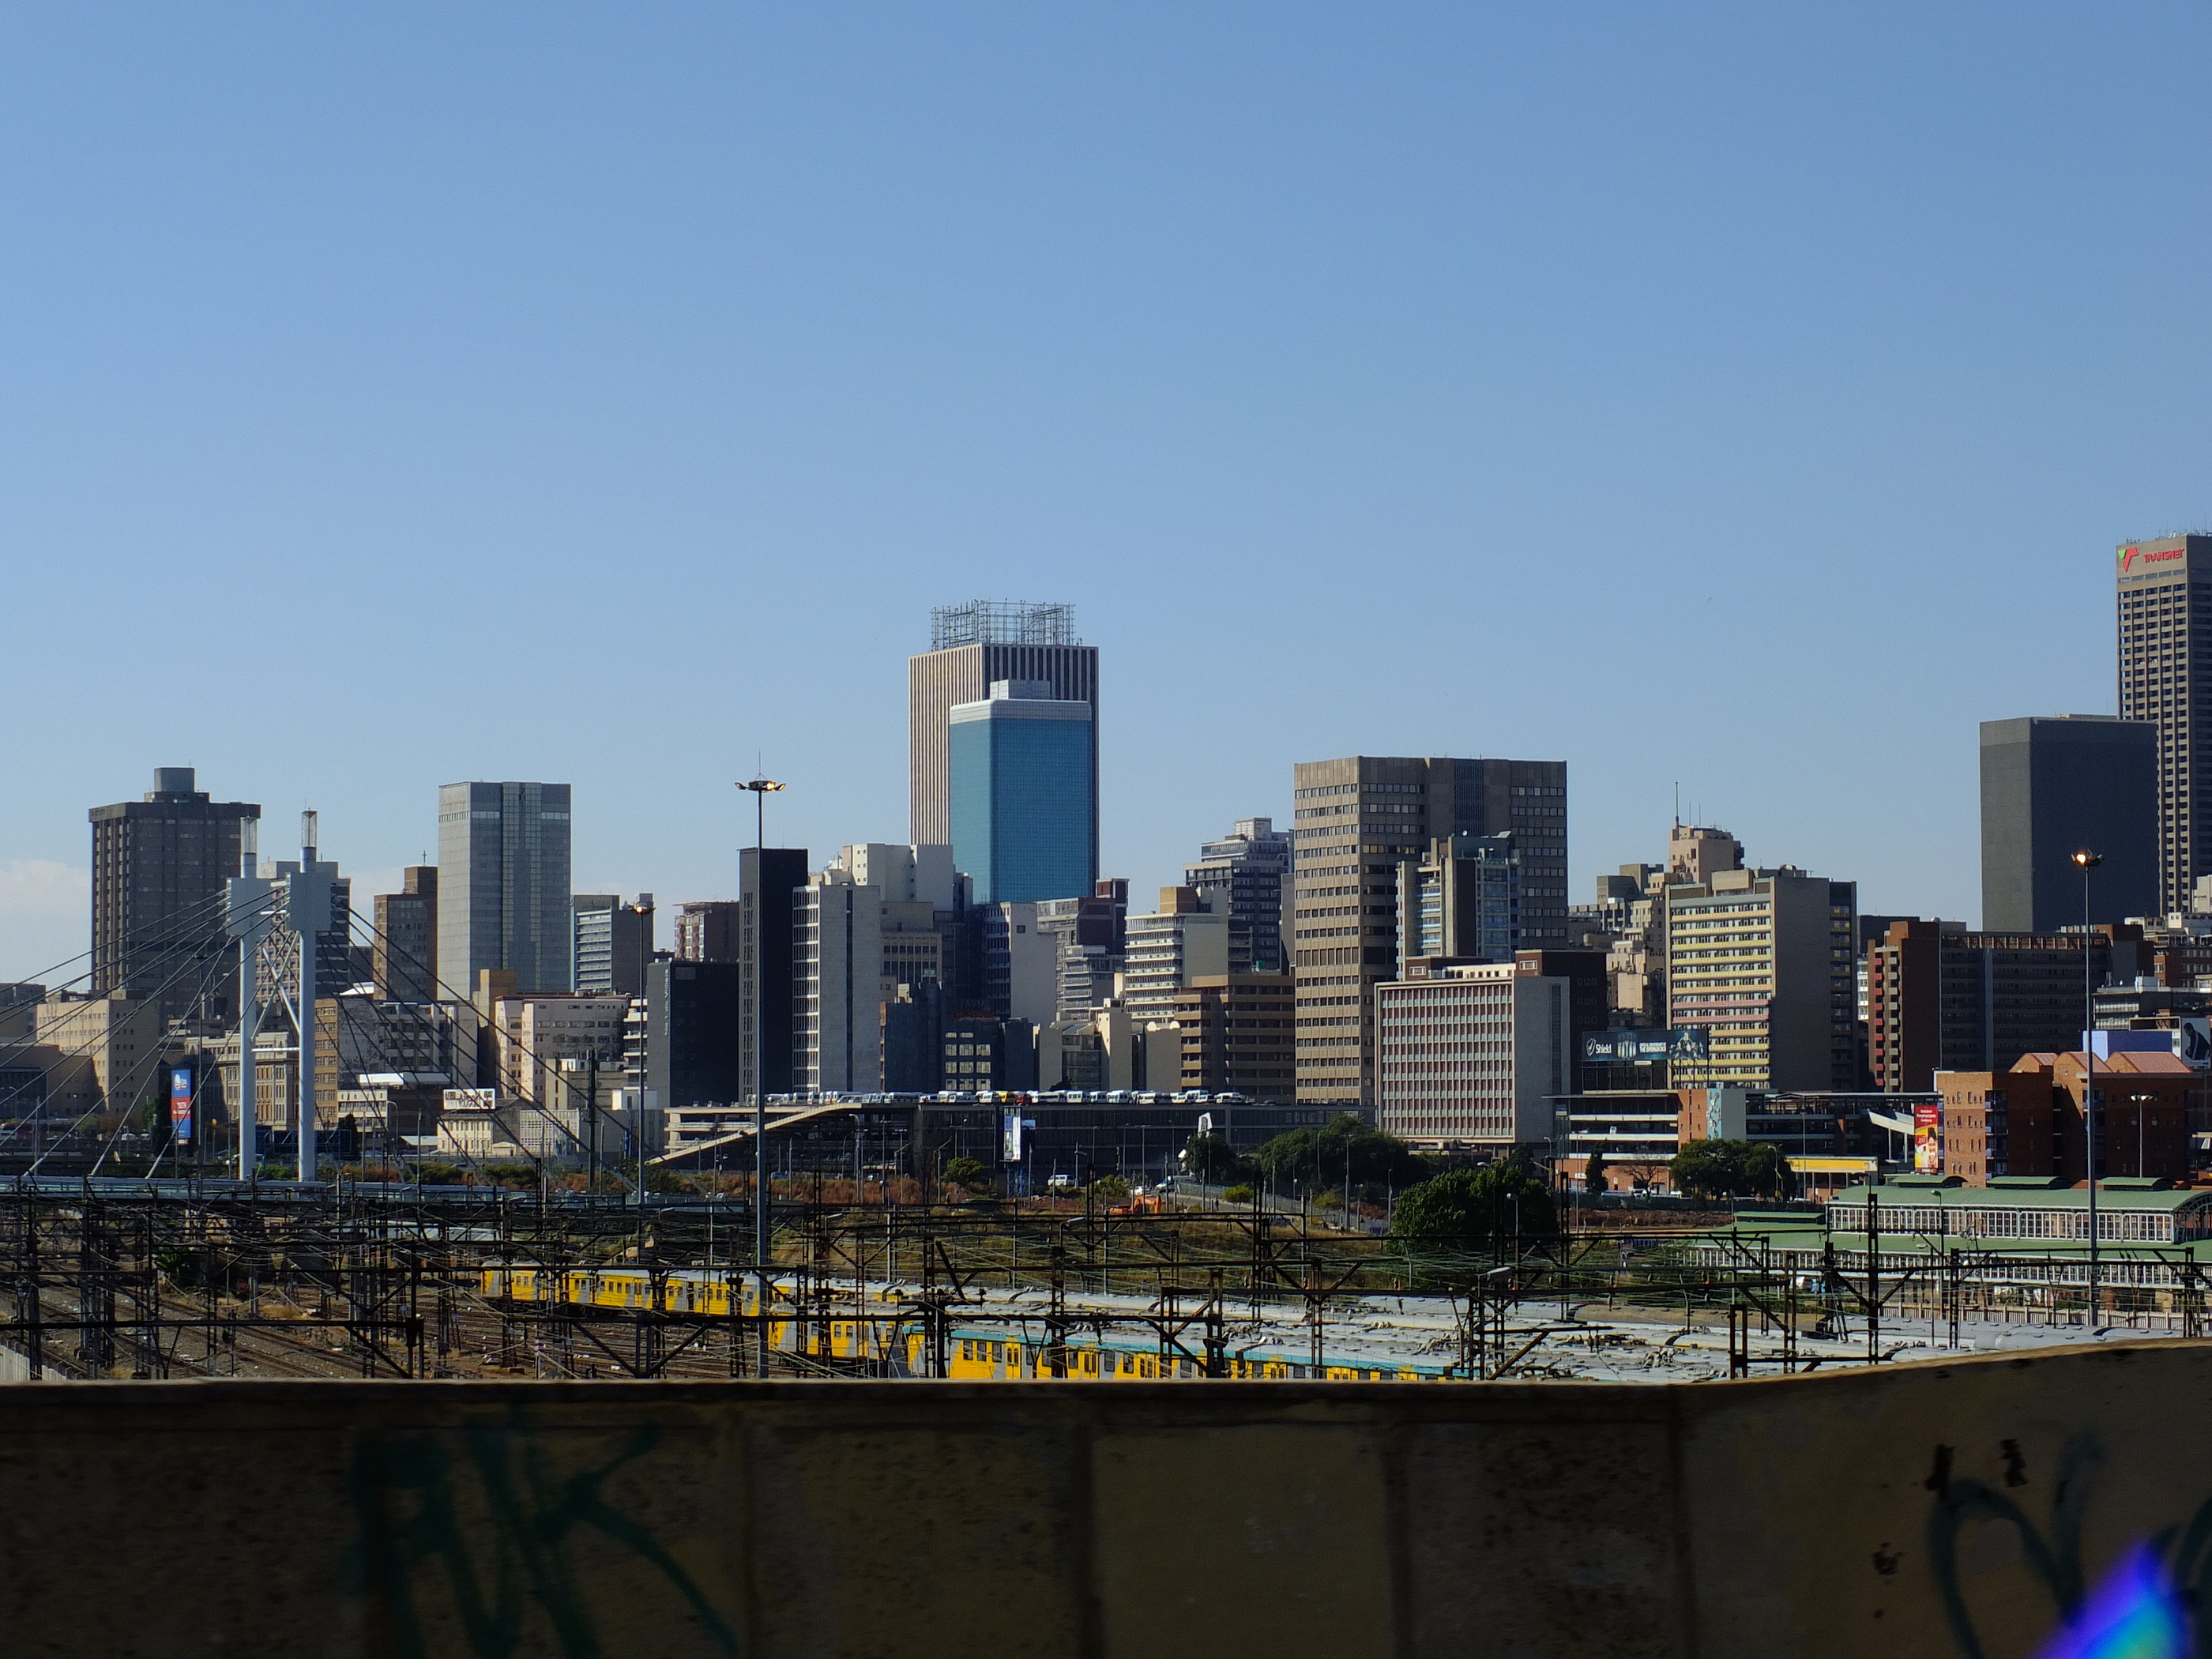 Johannesburg, South Africa - 28 Apr 2012: The view on the center of Johannesburg, South Africa